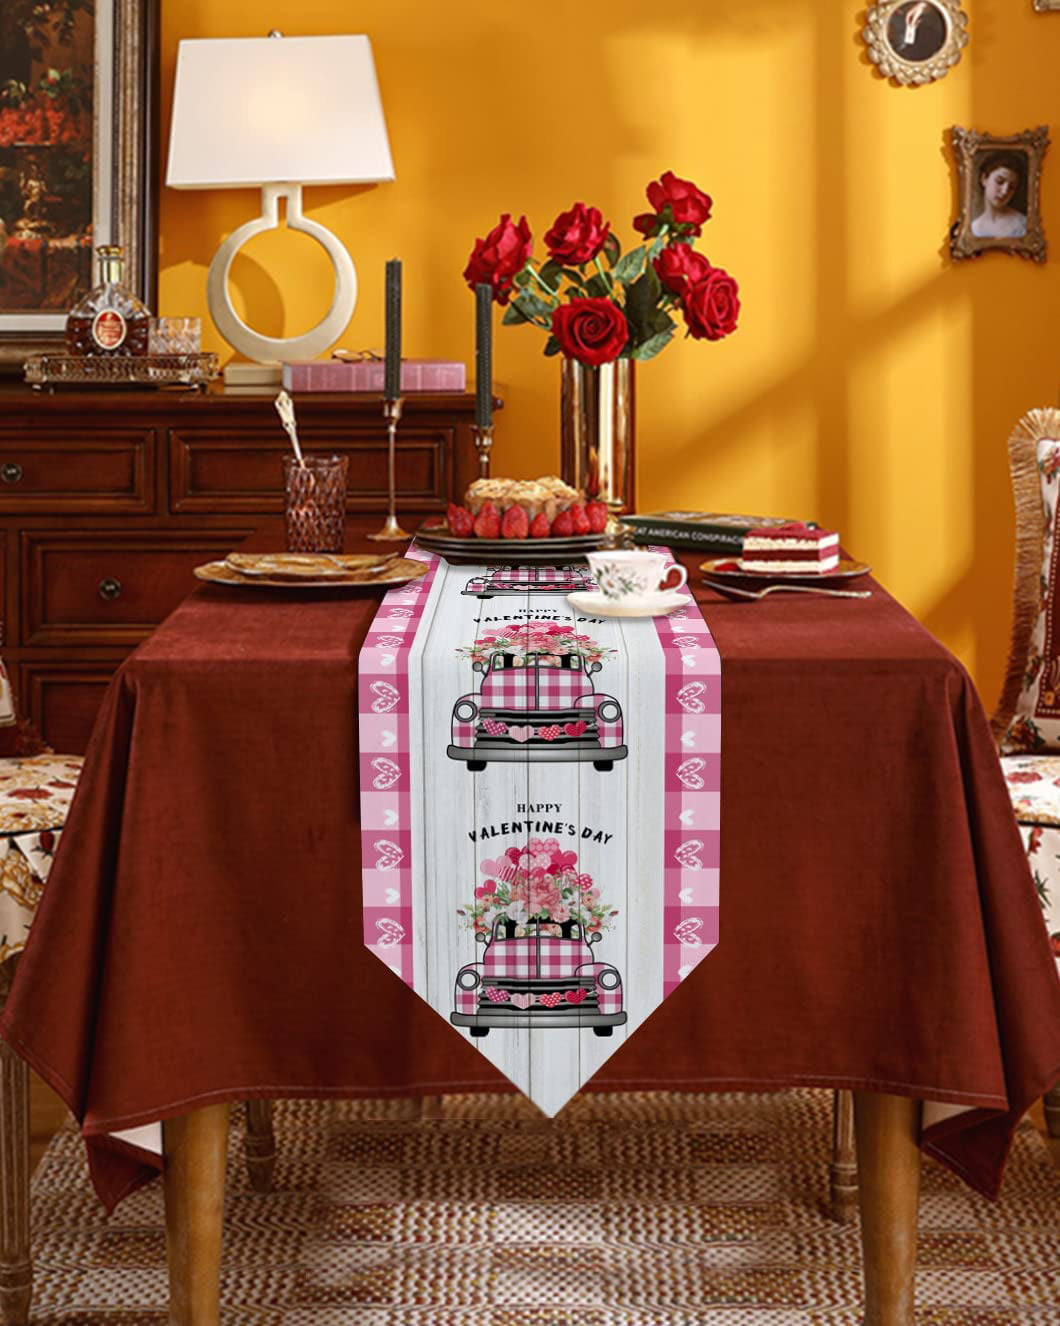 Meet 1998 Cotton Linen Table Runners Valentine's Day Love Heart Tablecovers for Kitchen Garden Wedding Parties Dinner Indoor Outdoors Home Decorations Red 13x90 inches